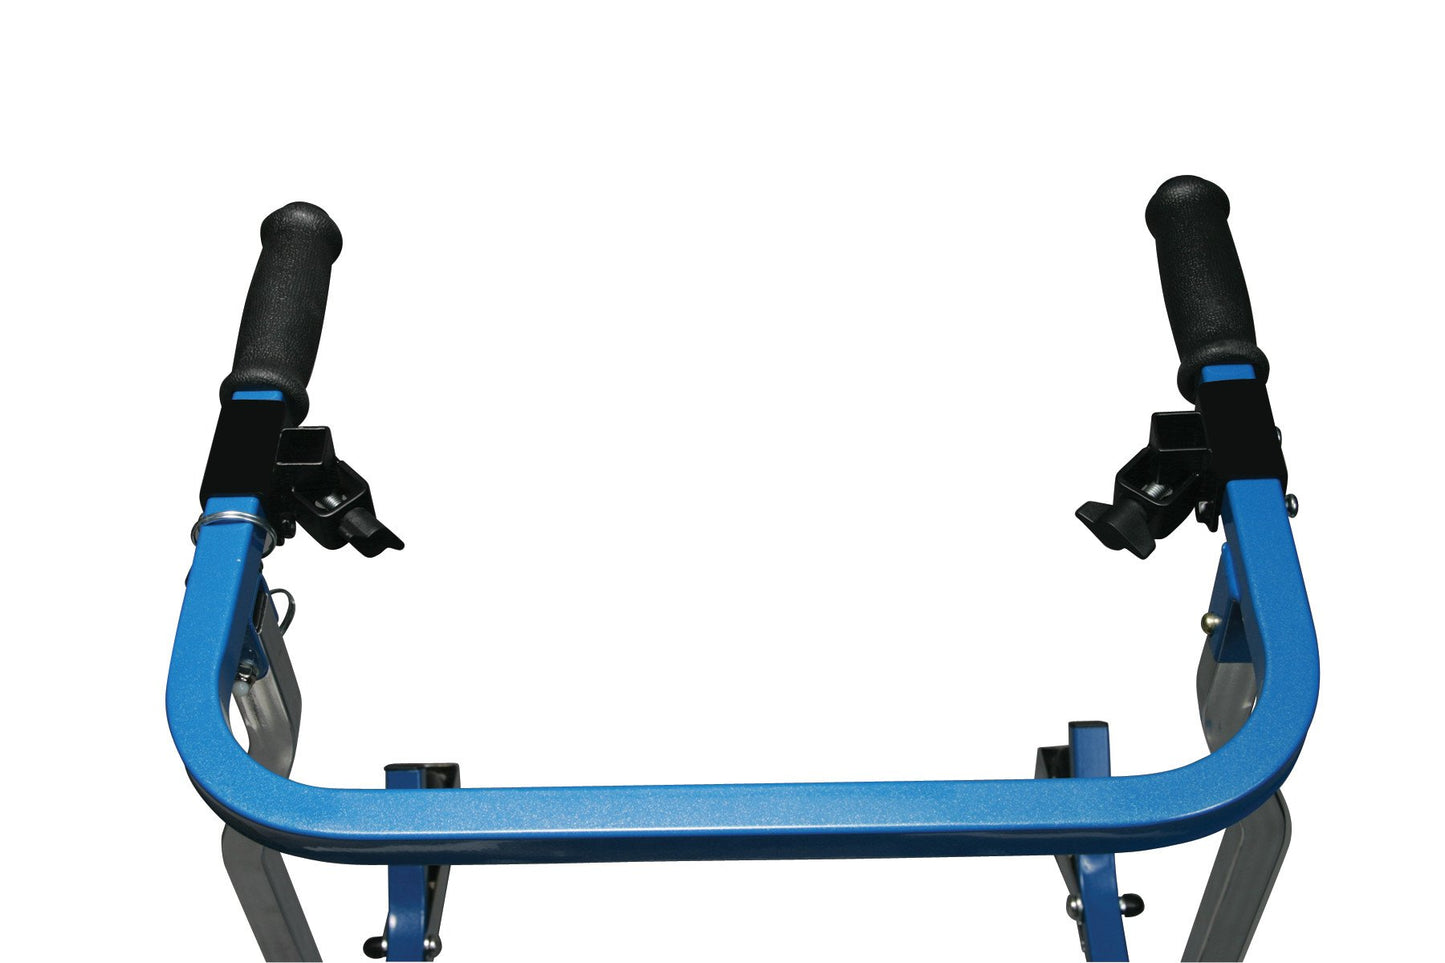 Forearm Platforms for all Wenzelite Posterior and Anterior Safety Roller and Gait Trainers